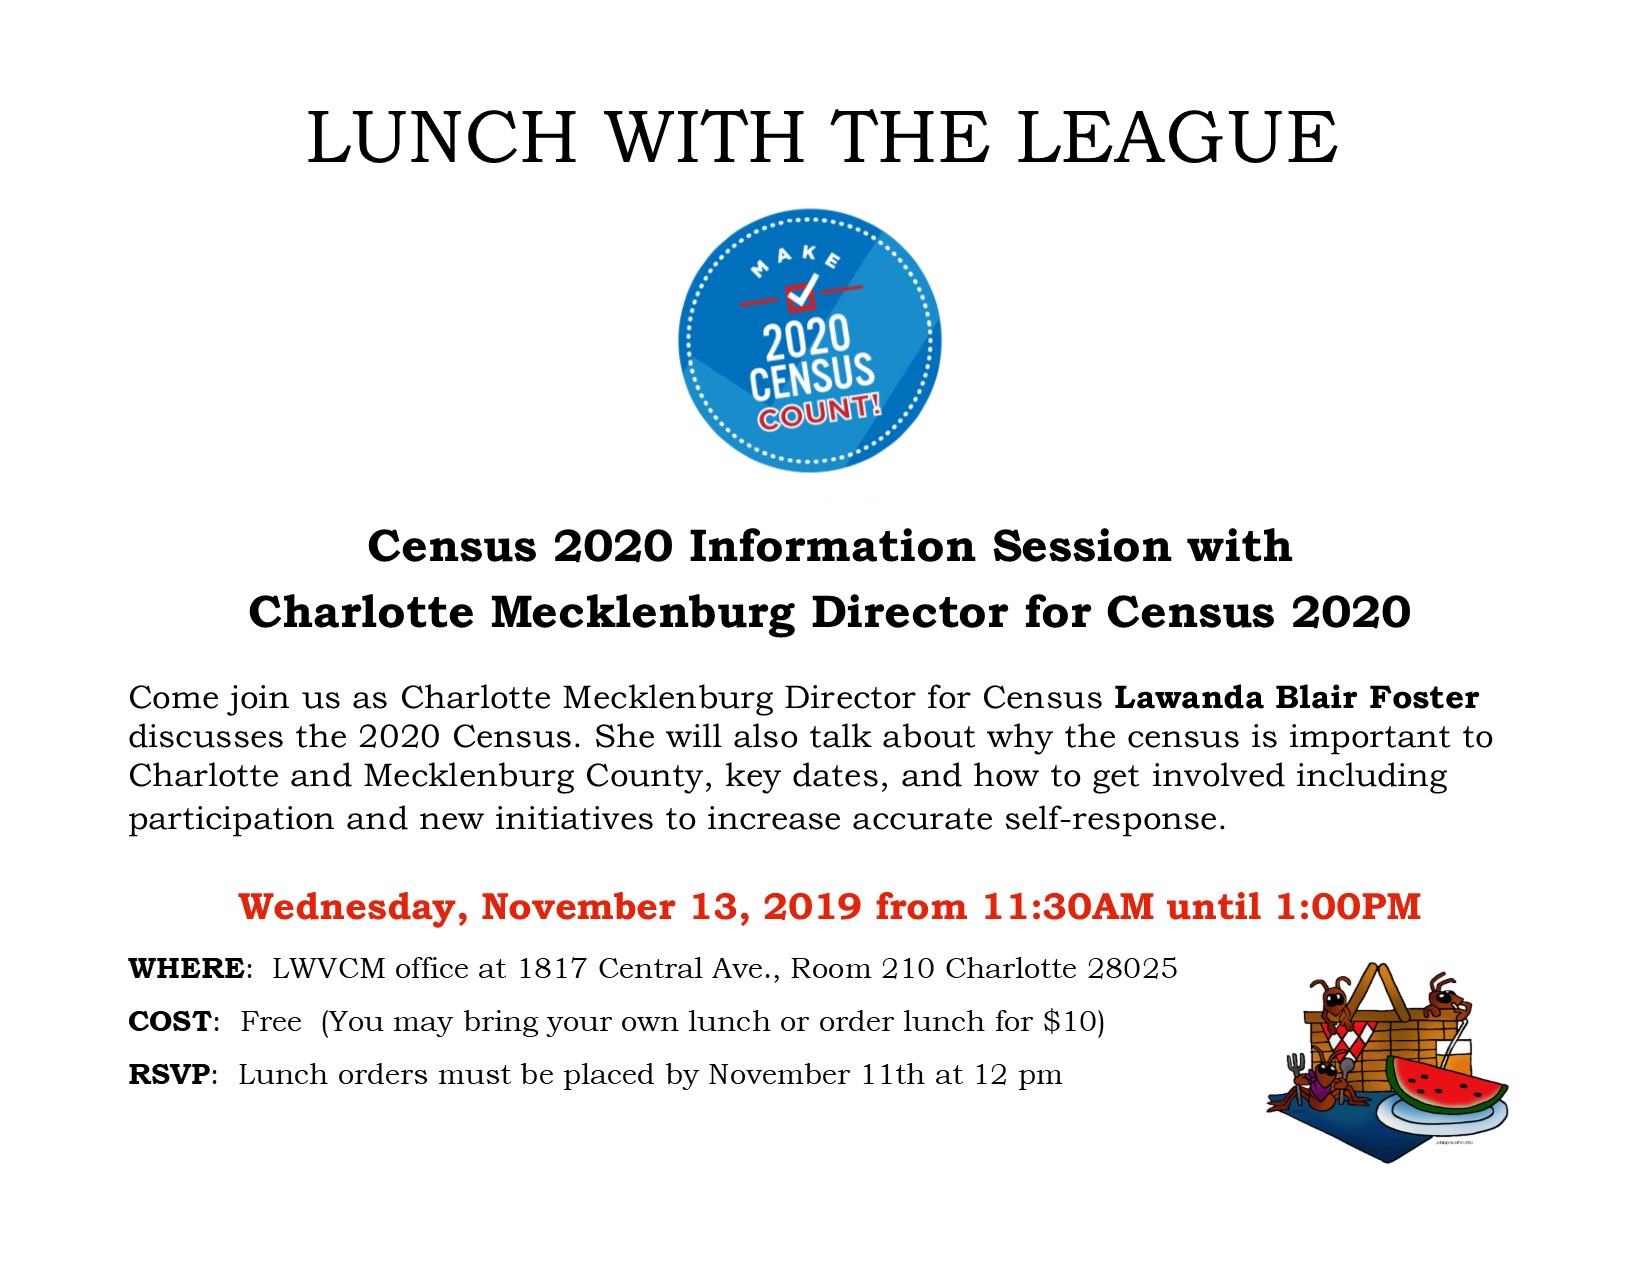 Lunch with the League Welcomes Charlotte Mecklenburg Director for Census 2020